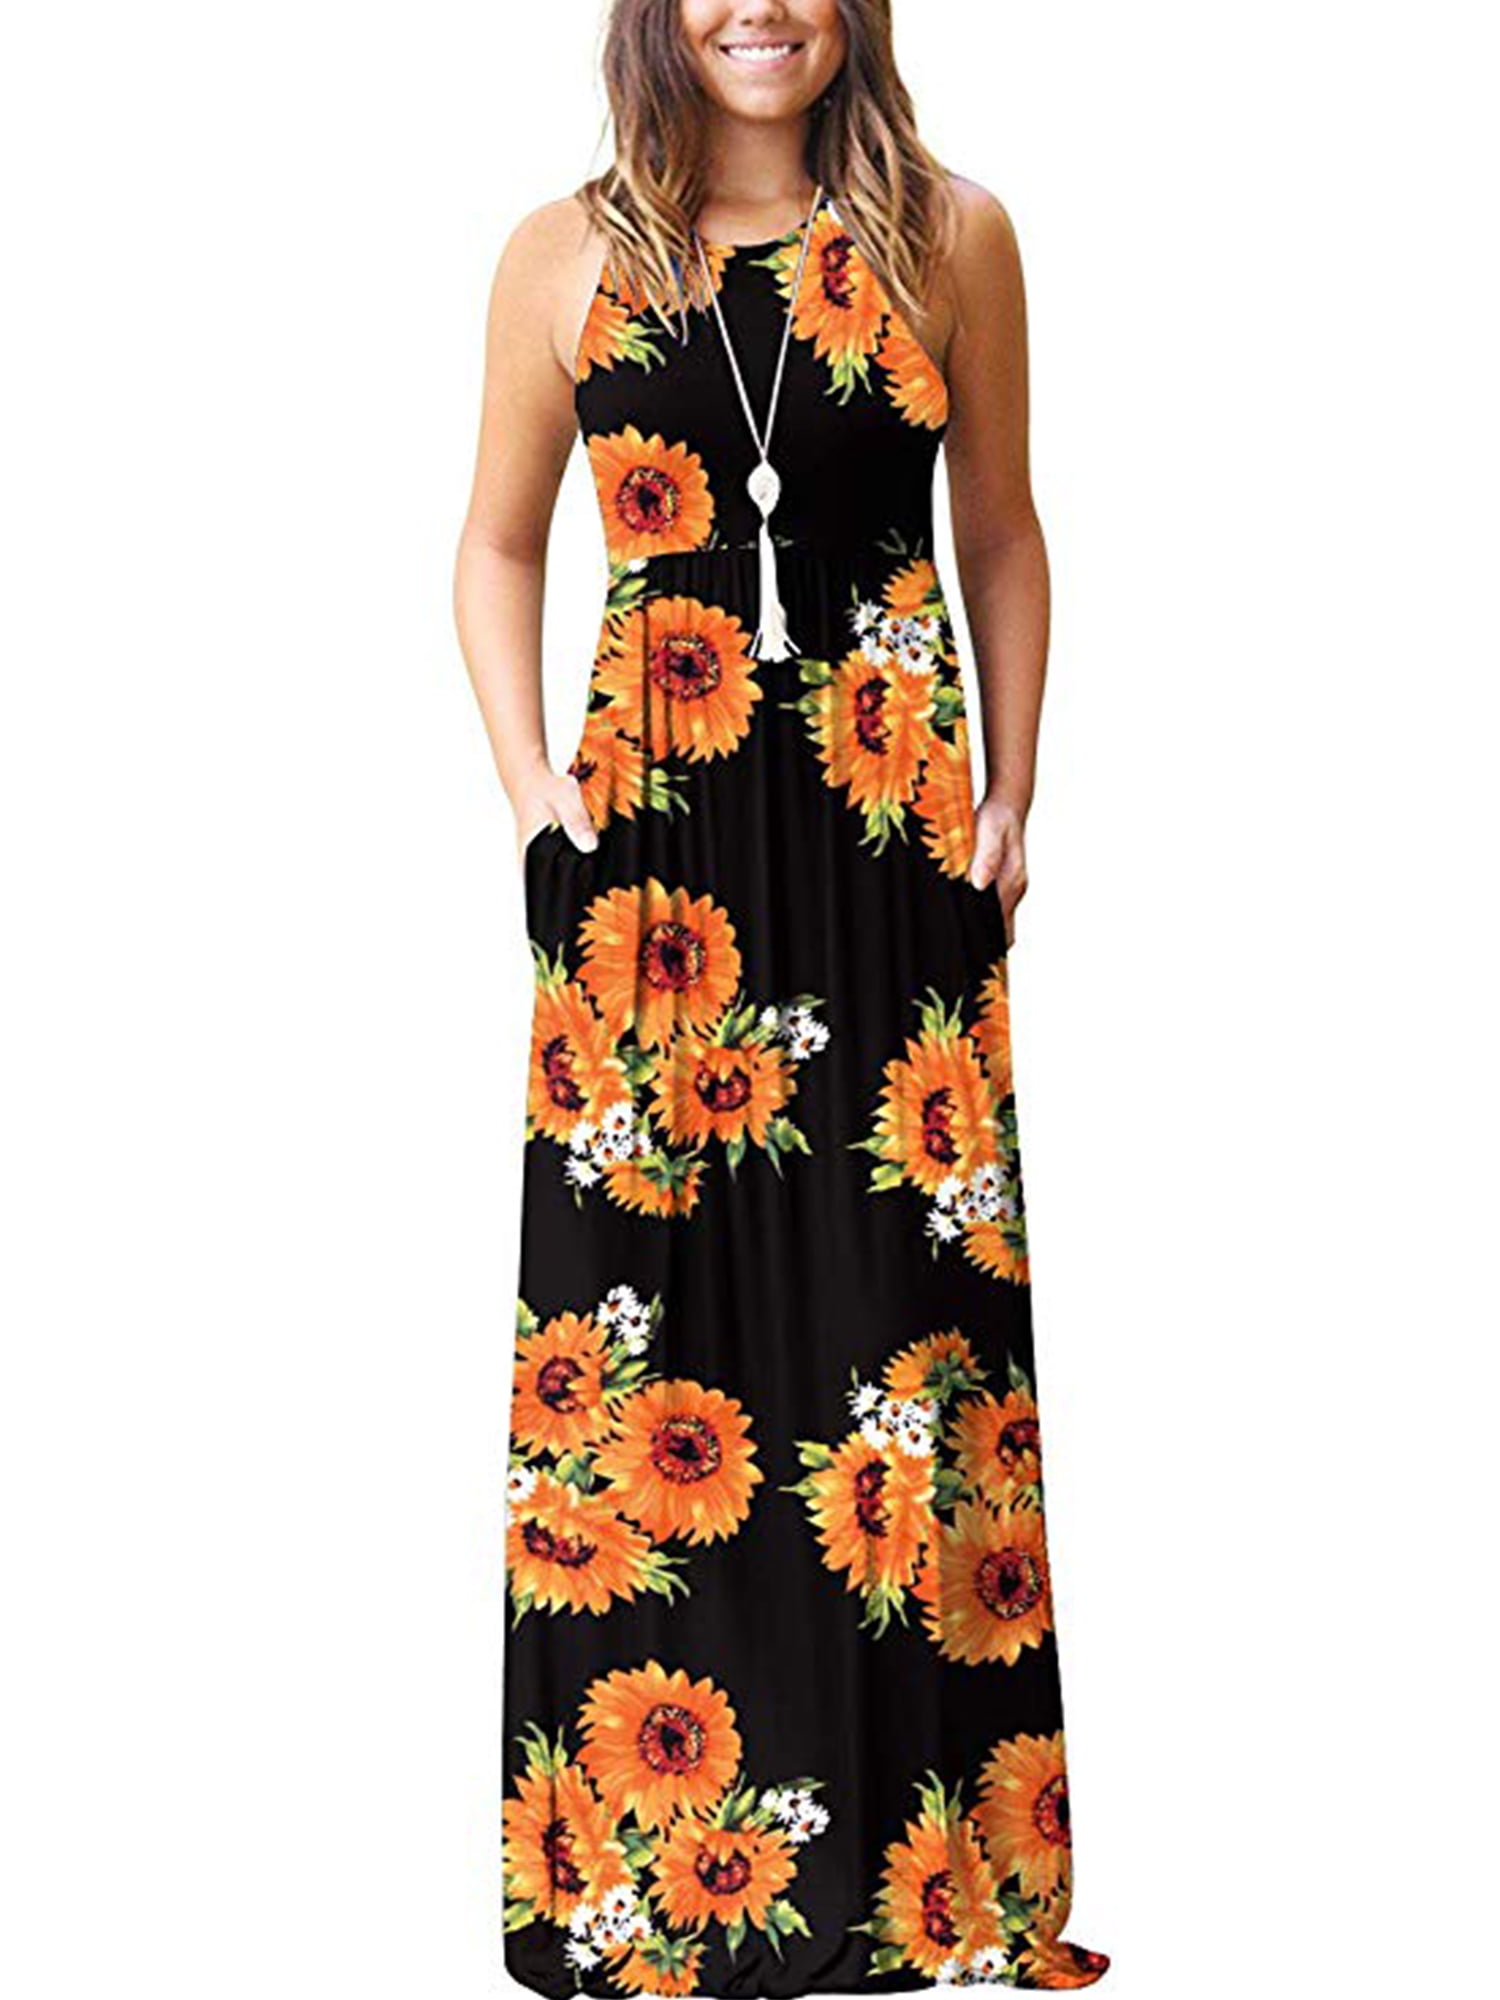 Sexy Dance - Hawaiian Holiday dresses For Women Floral Print Long Maxi ...